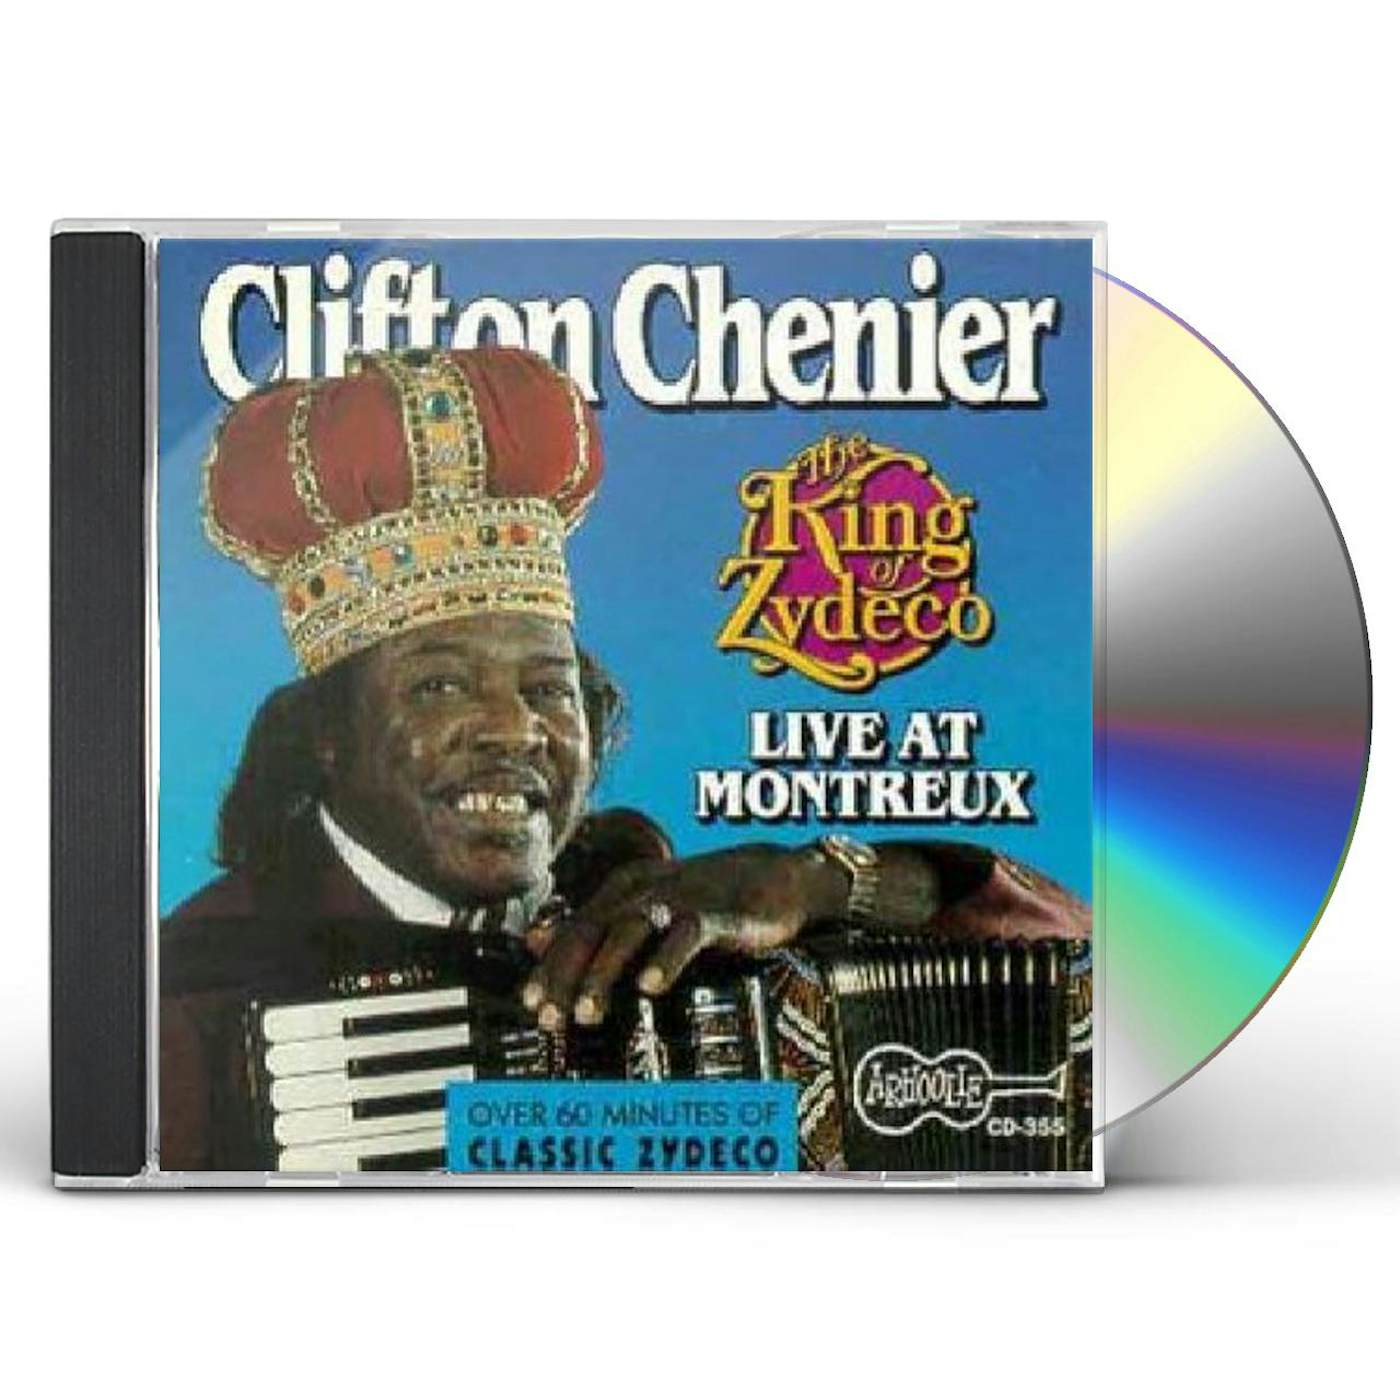 Clifton Chenier THE KING OF ZYDECO LIVE AT MONTREUX CD